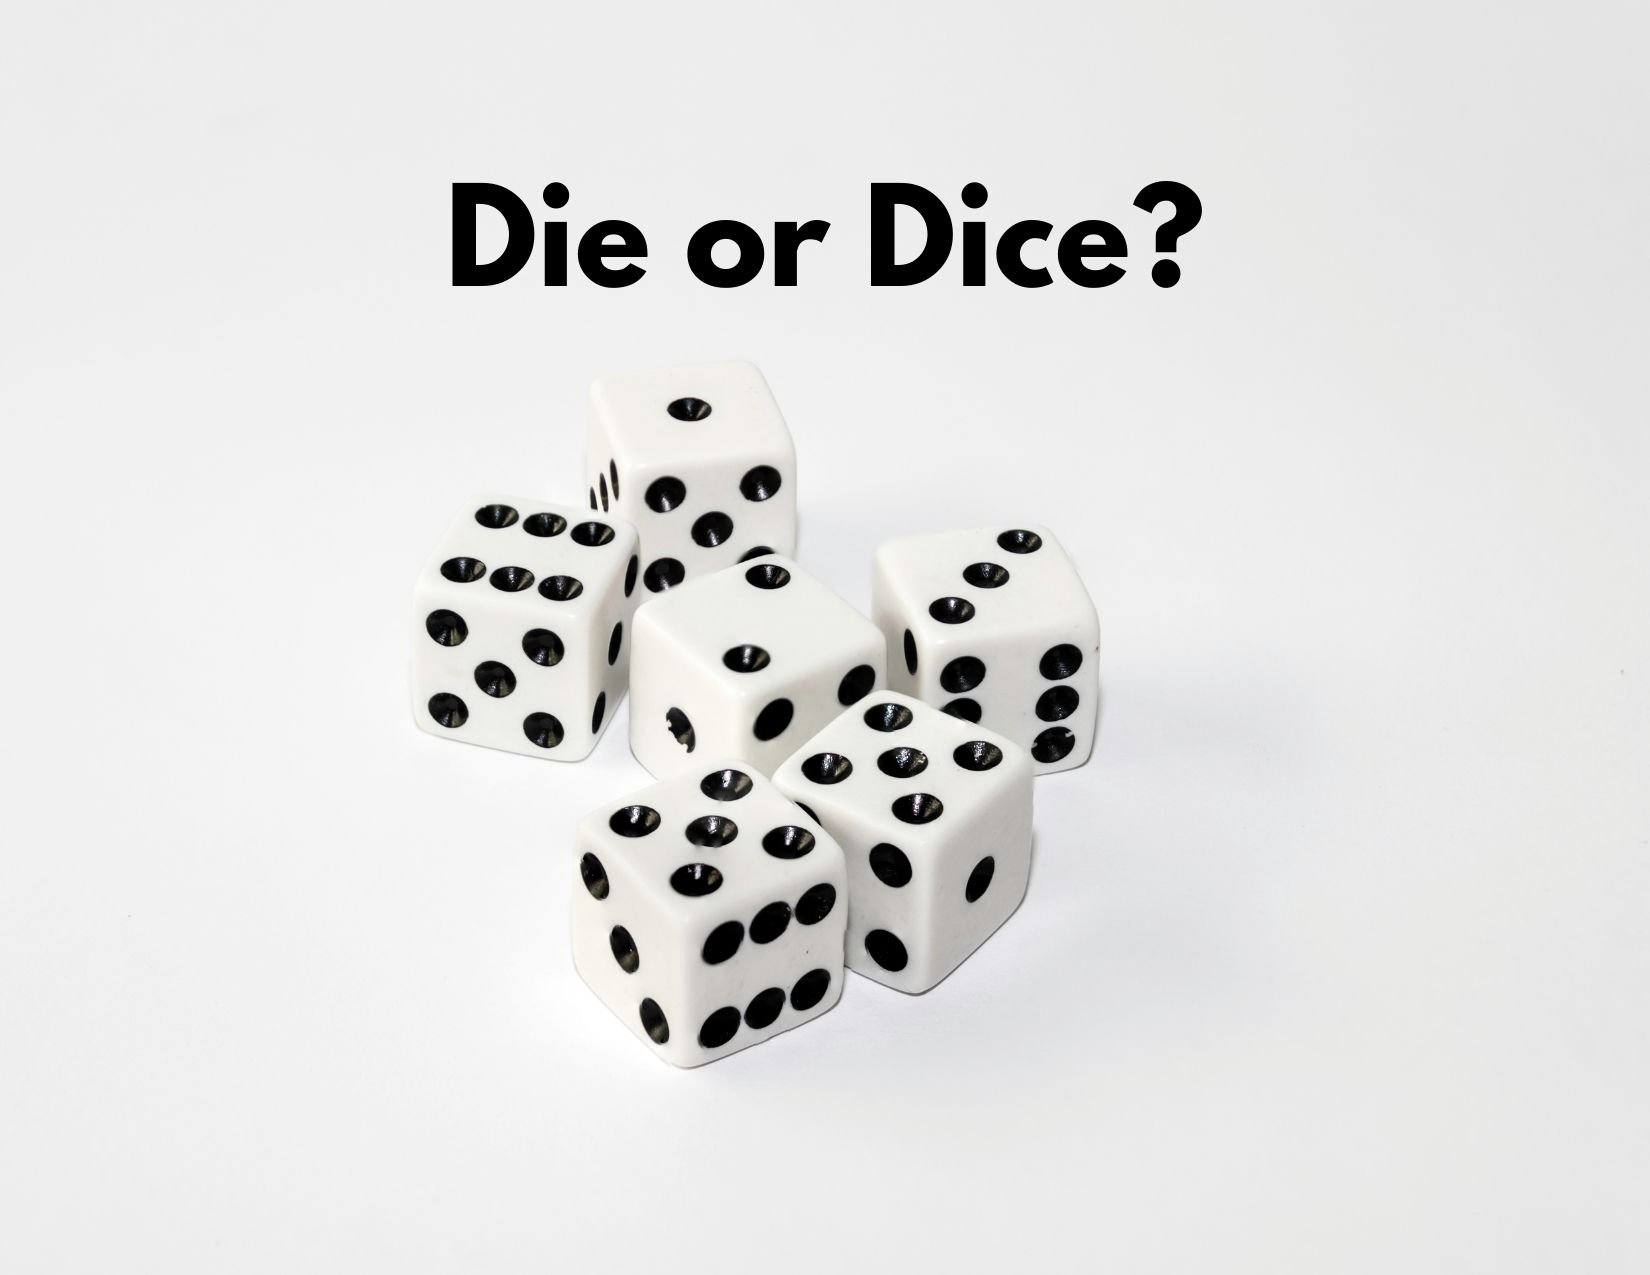 A picture of dice with the words "Die or Dice?"